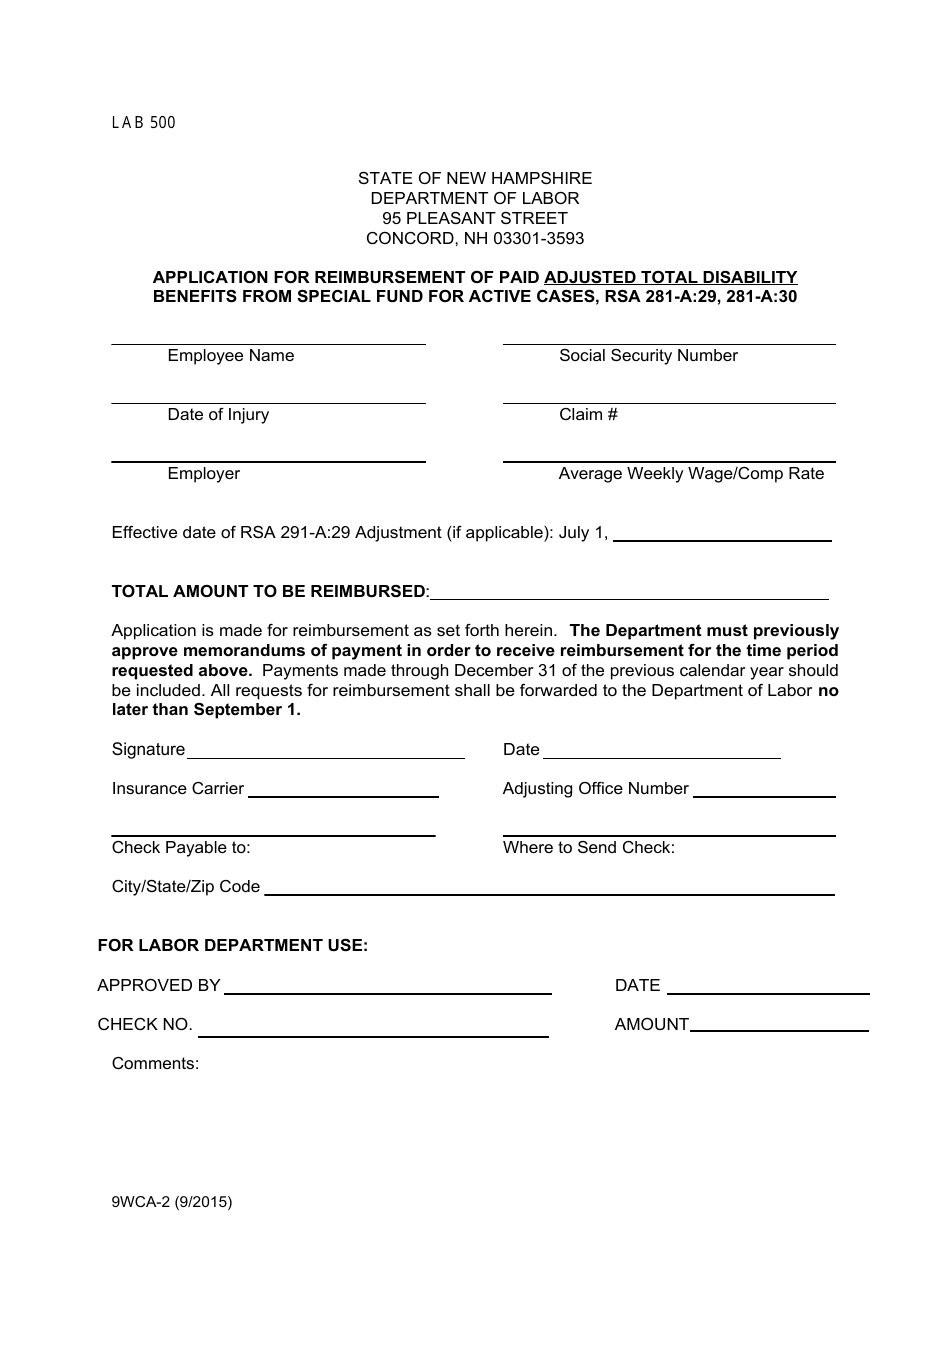 Form 9WCA-2 Application for Reimbursement of Paid Adjusted Total Disability Benefits From Special Fund for Active Cases, Rsa 281-a:29, 281-a:30 - New Hampshire, Page 1